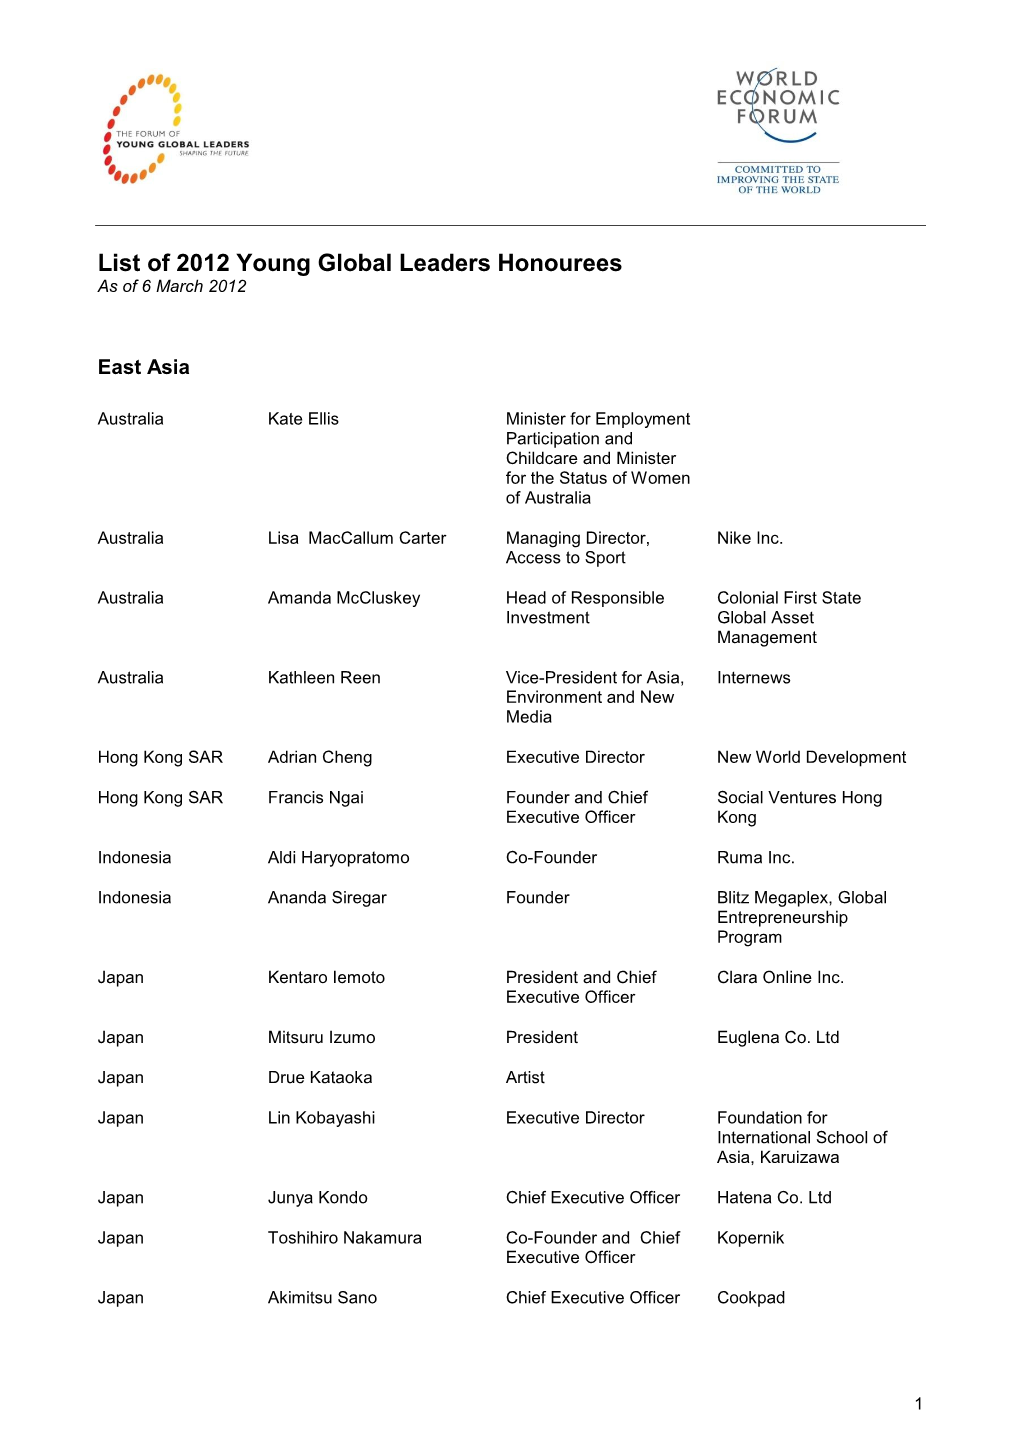 List of 2012 Young Global Leaders Honourees As of 6 March 2012